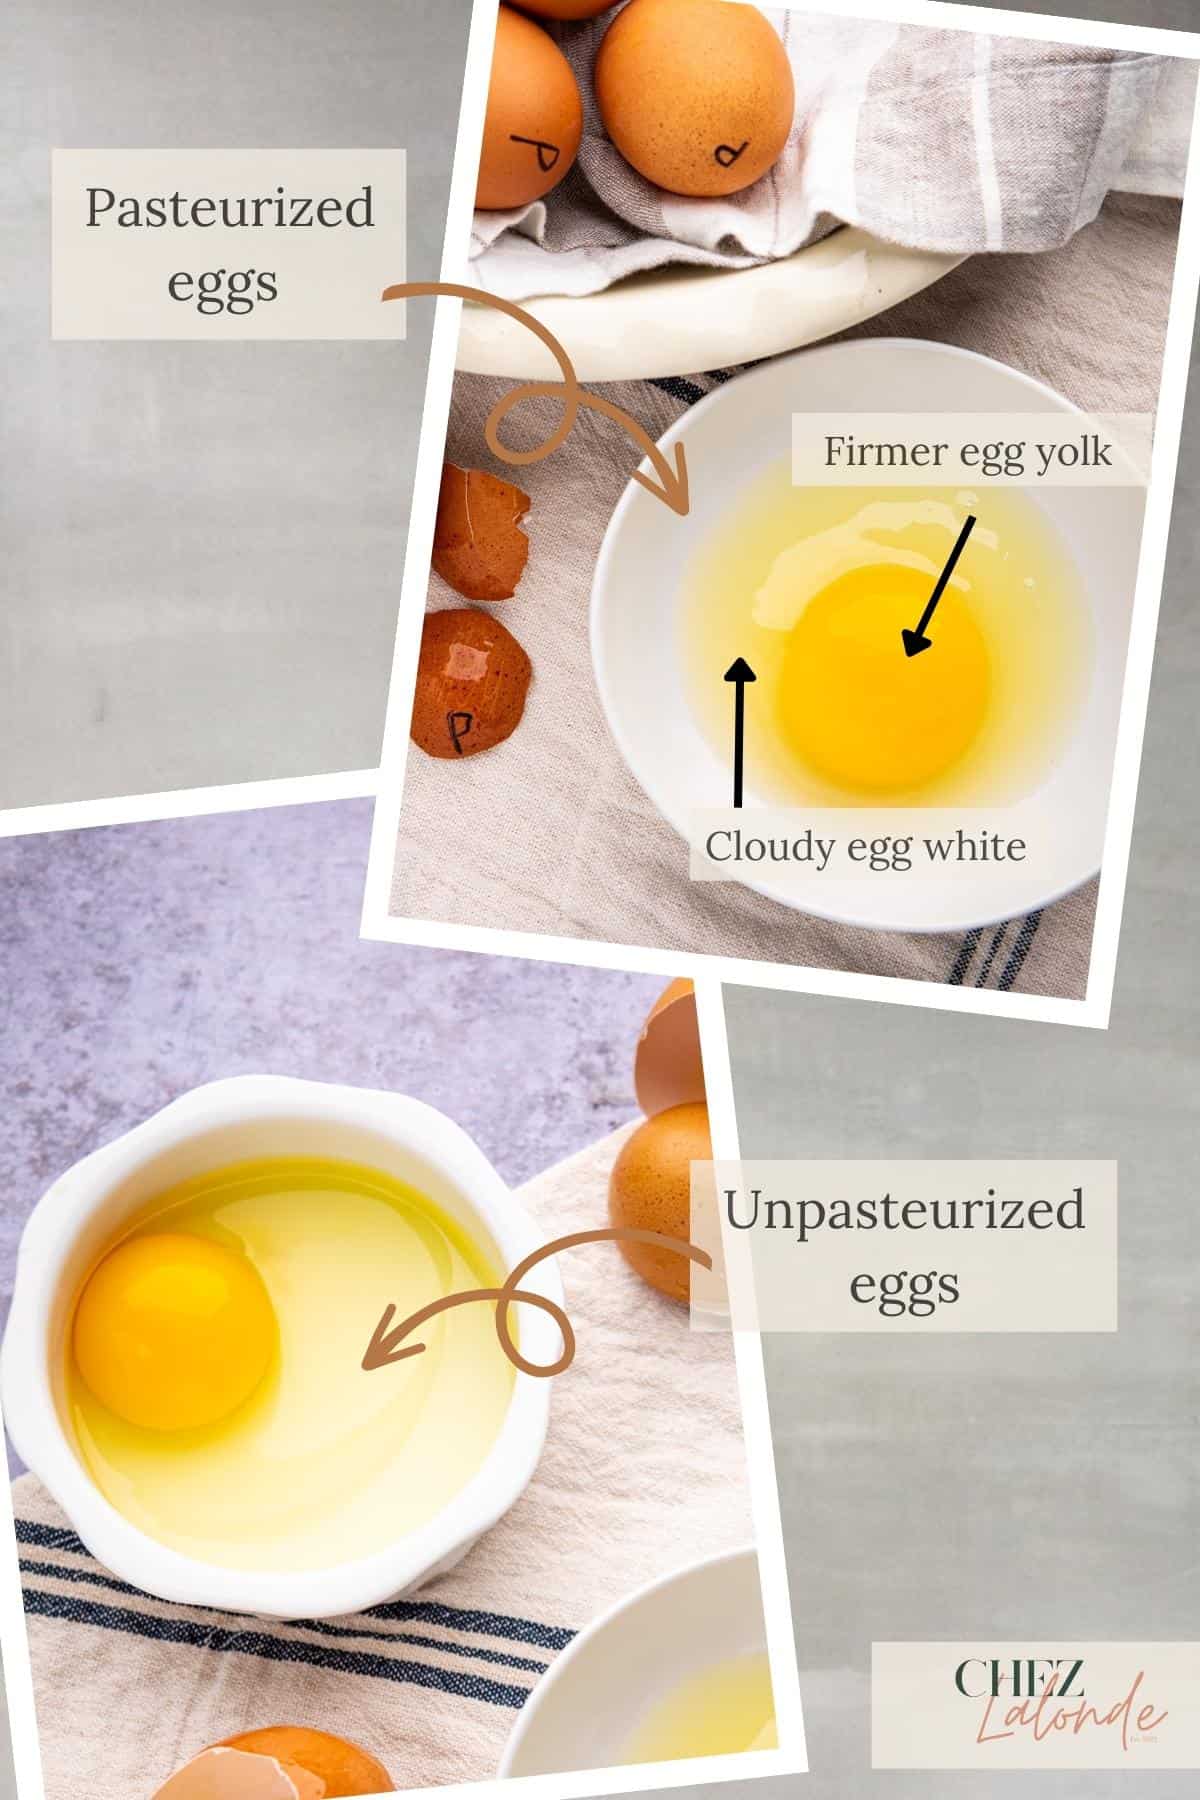 Comparison between pasteurized and unpasteurized egg. 